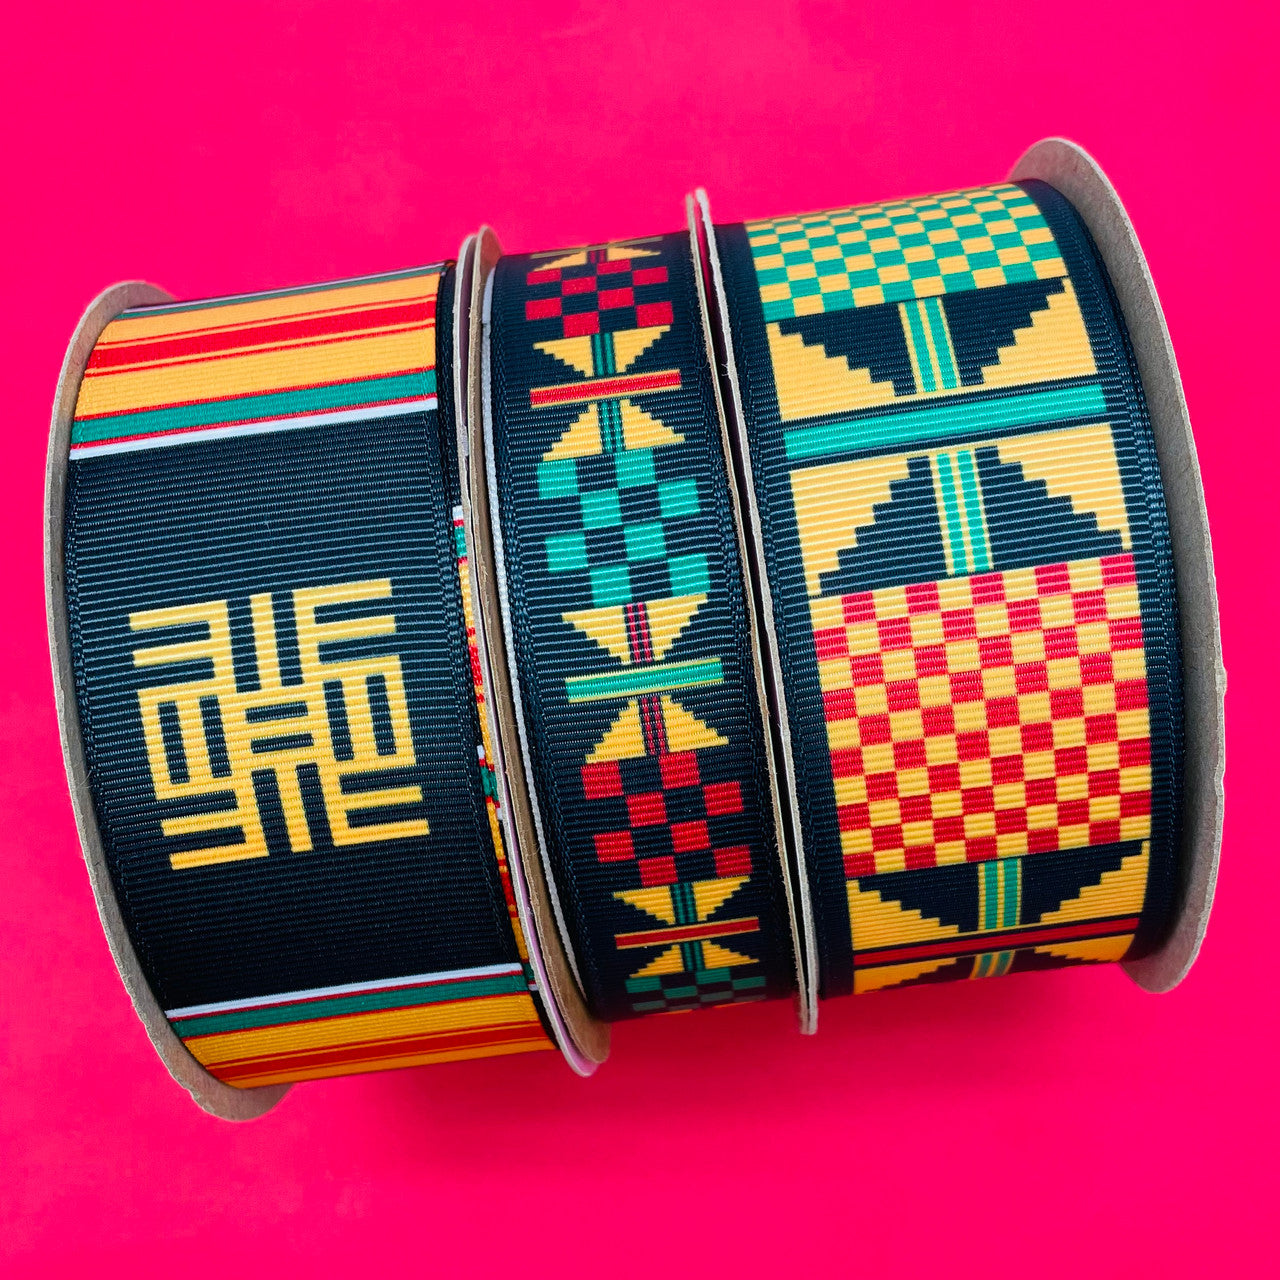 Combine our African Kente scroll ribbon with our traditional Kente designs for a beautiful combination of print and color!